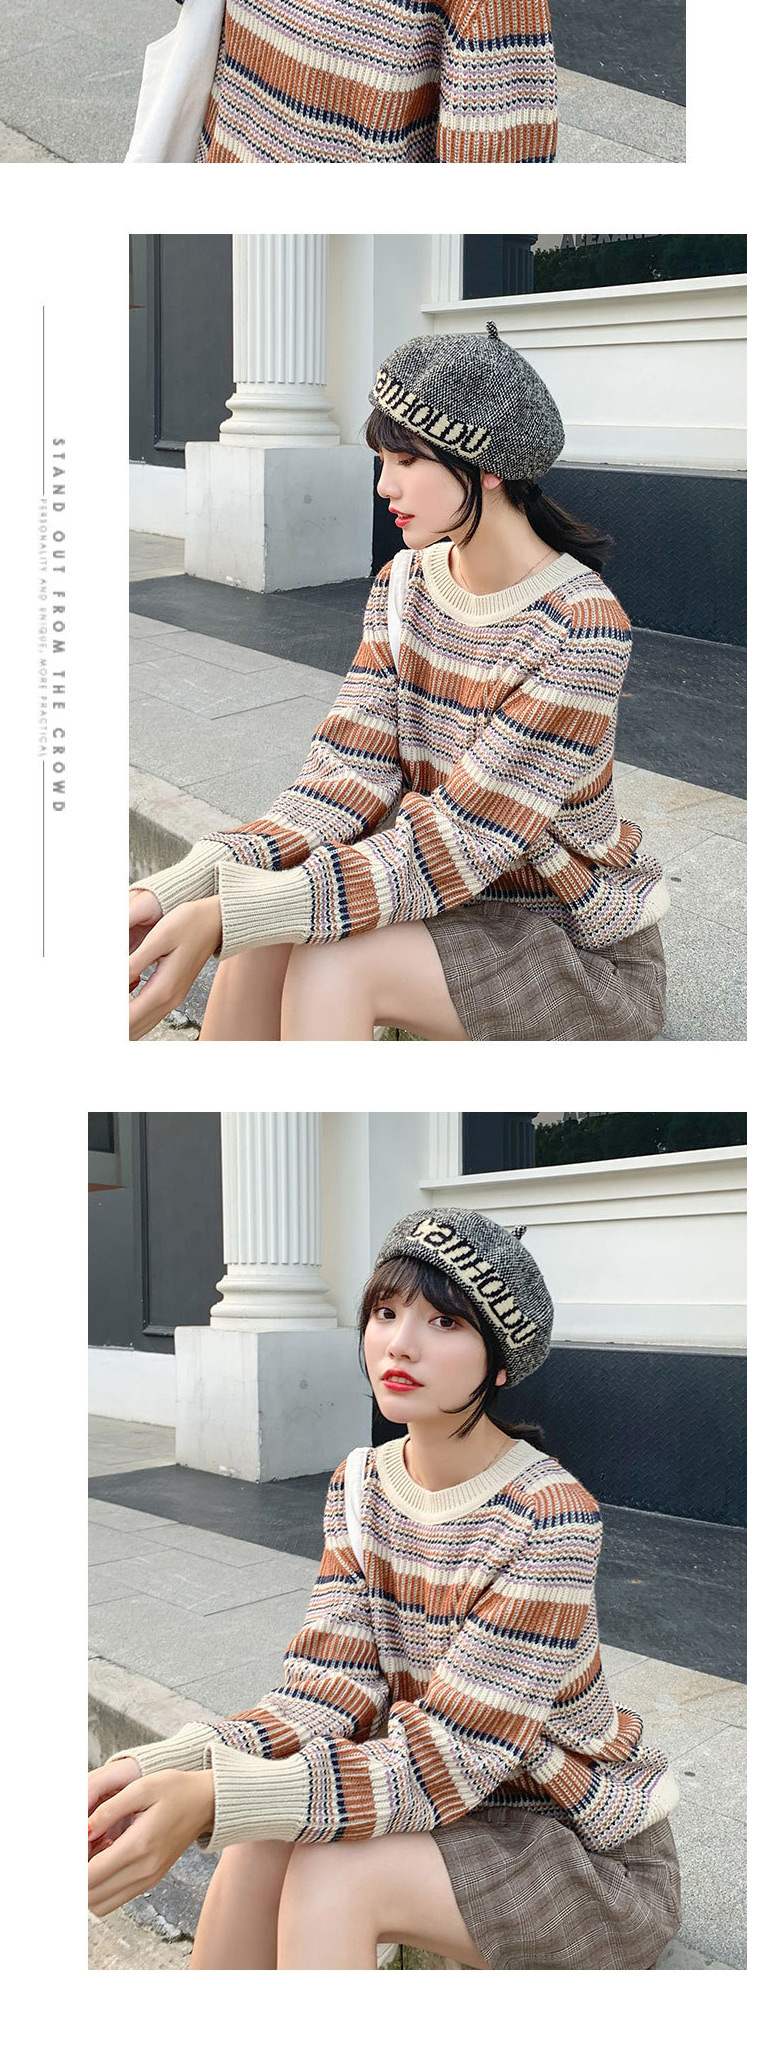 Fashion Big Red Letter Wool Contrast Beret,Knitting Wool Hats